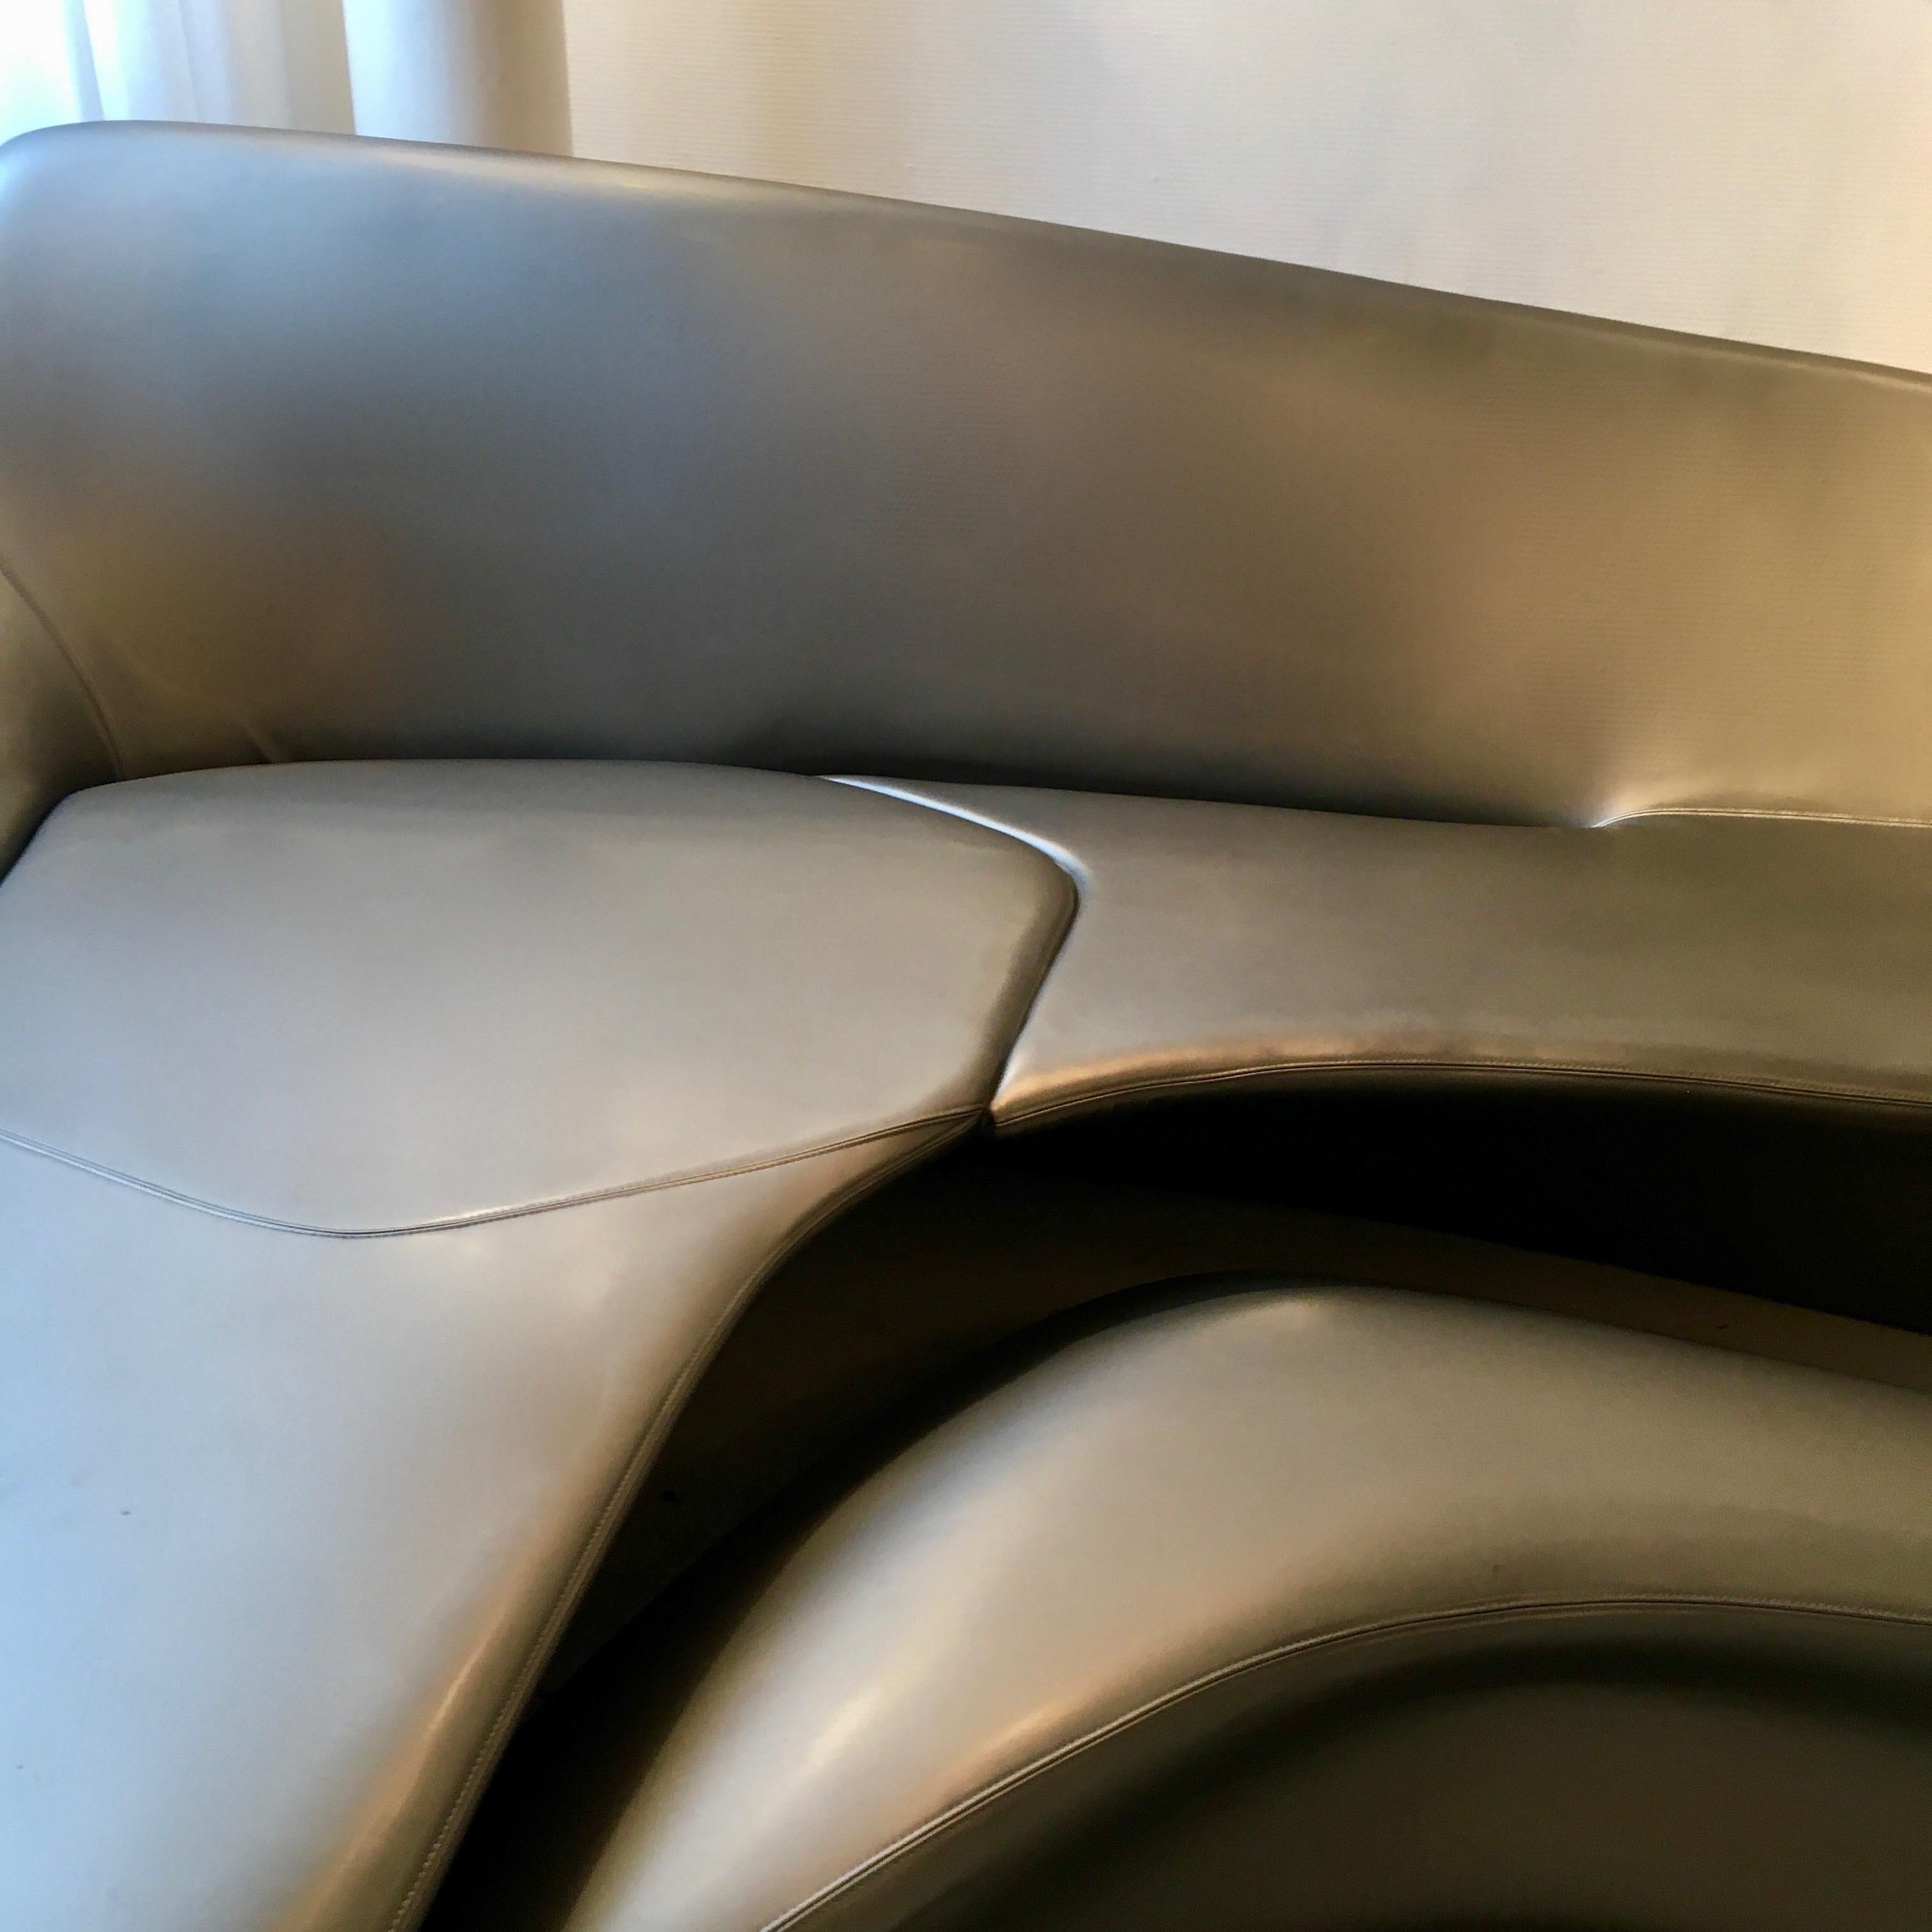 Specular futuristic Moon System sofa, three separates pieces including the ottoman.
Steel structure filled with foam. Silver vinyl cover.
Designed by Zaha Hadid for B&B Italy around 2008.